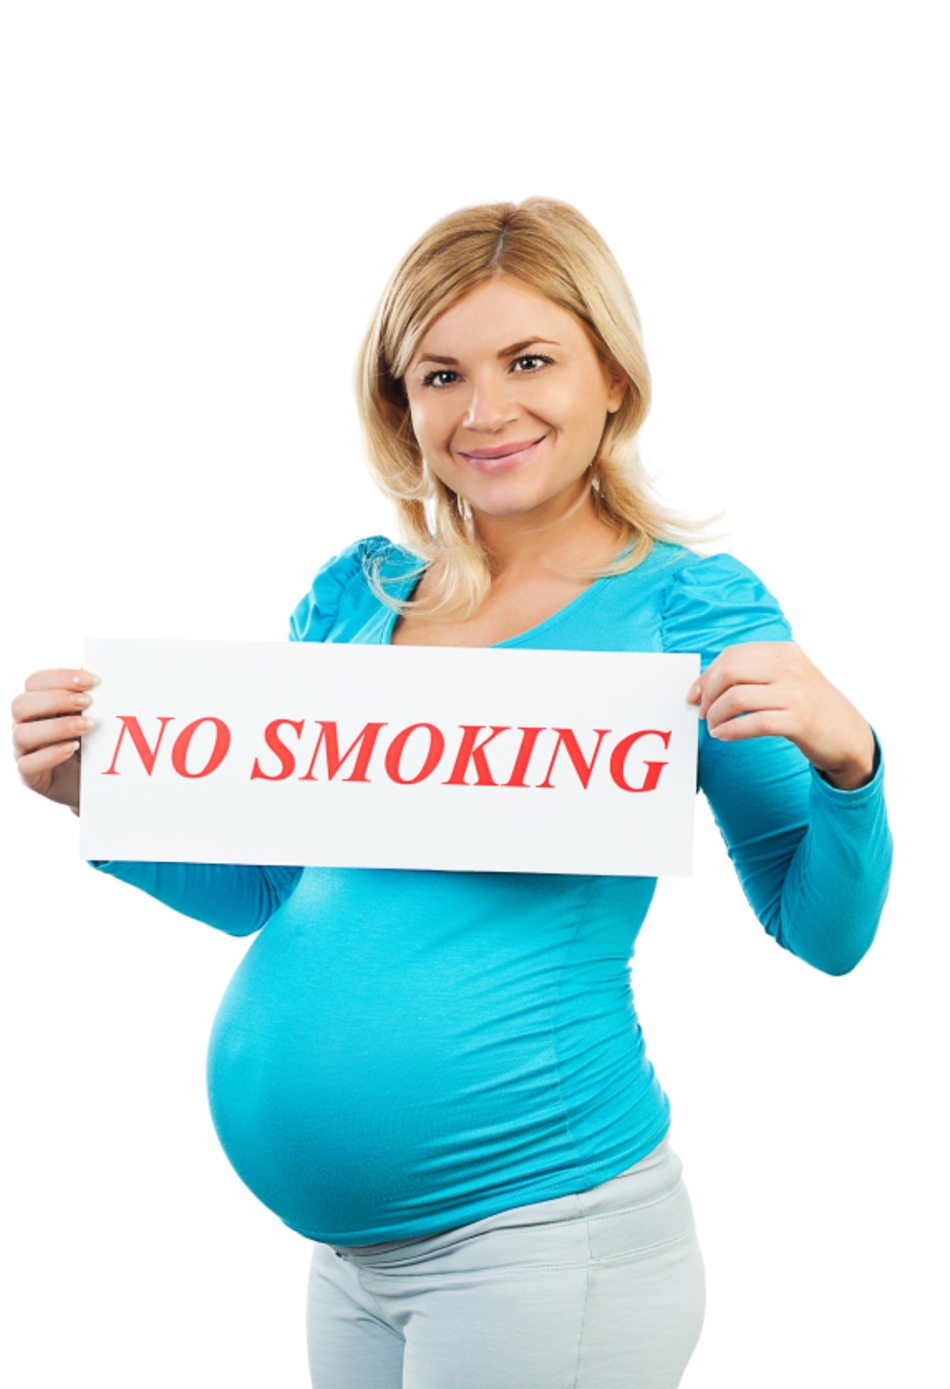 Maternal Smoking Can Change the Development of Children’s Lungs